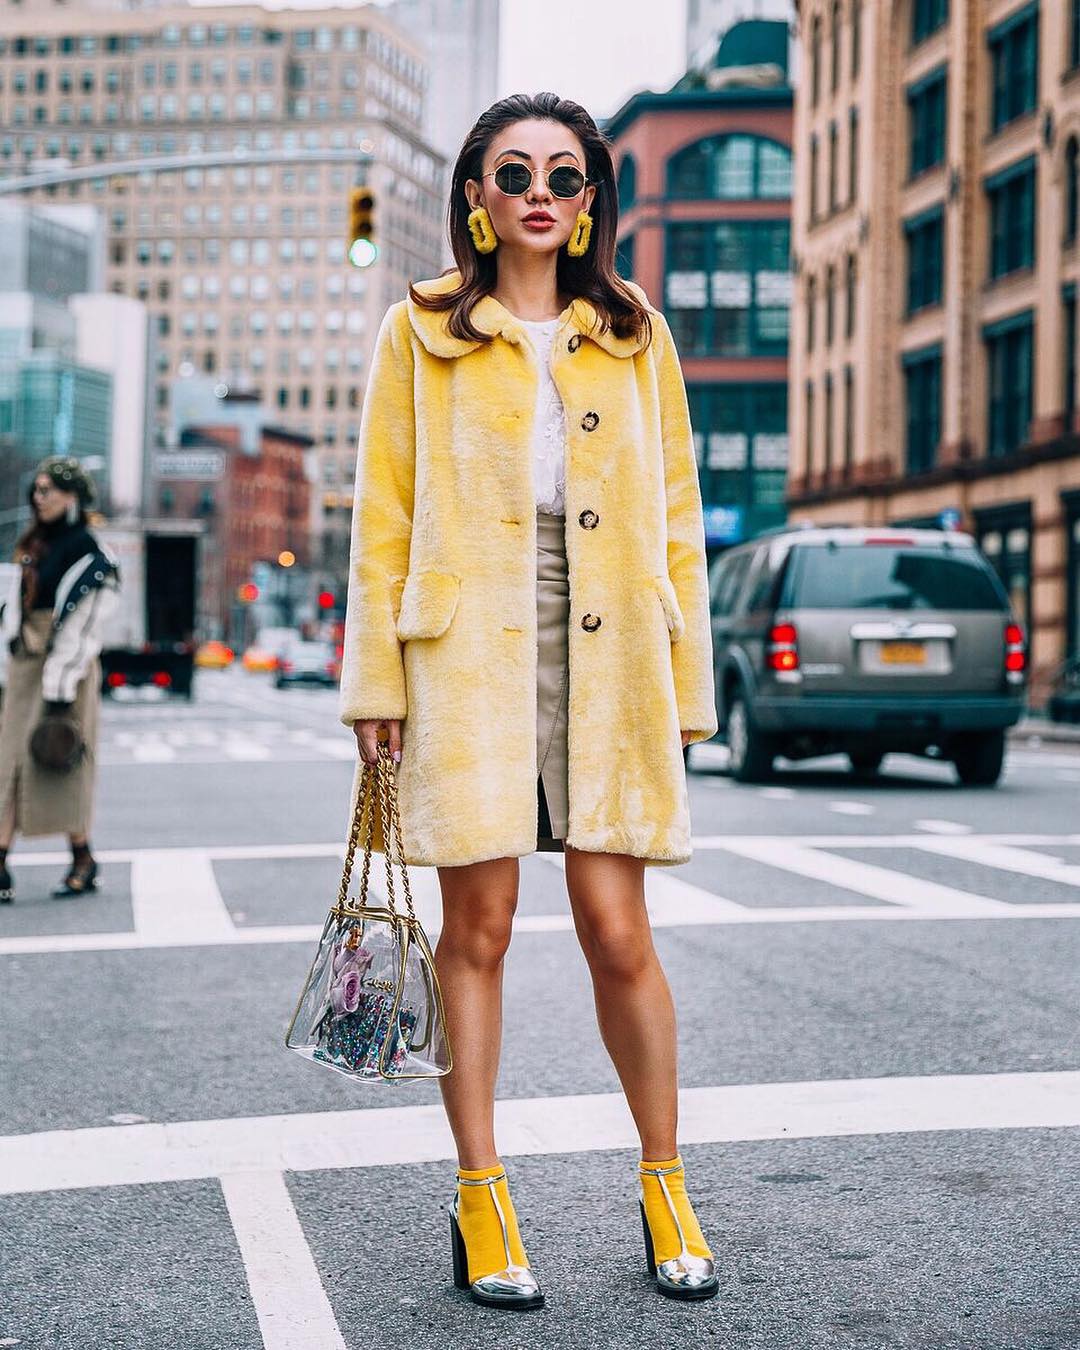 Pastel Yellow Fur Coat And Silver Heels
With Yellow Socks Outfit